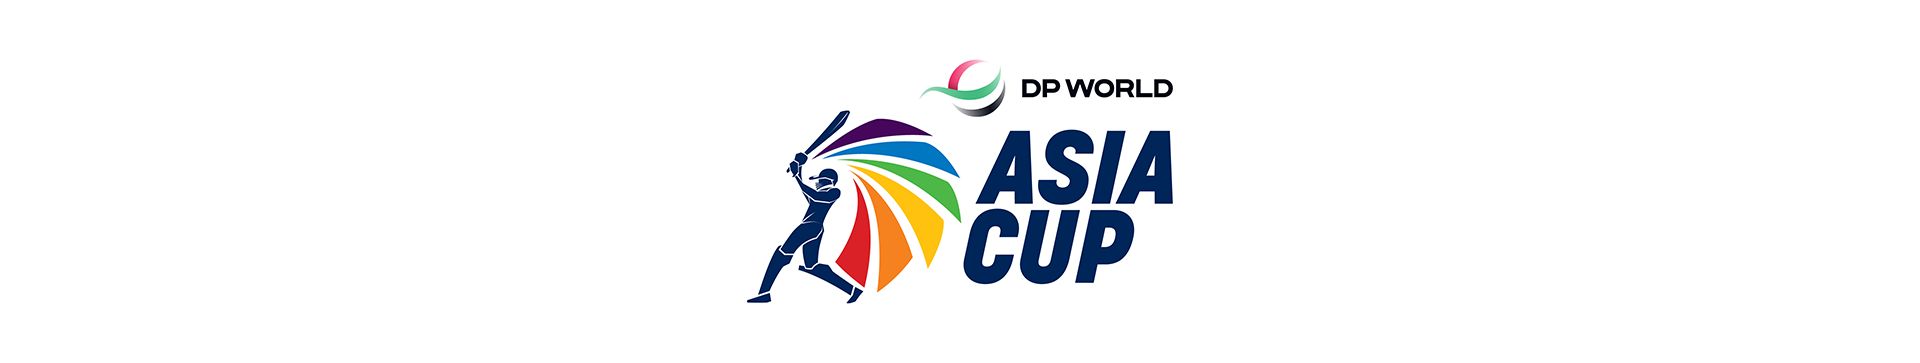 evision-world-asia-cup-2022-1920x363